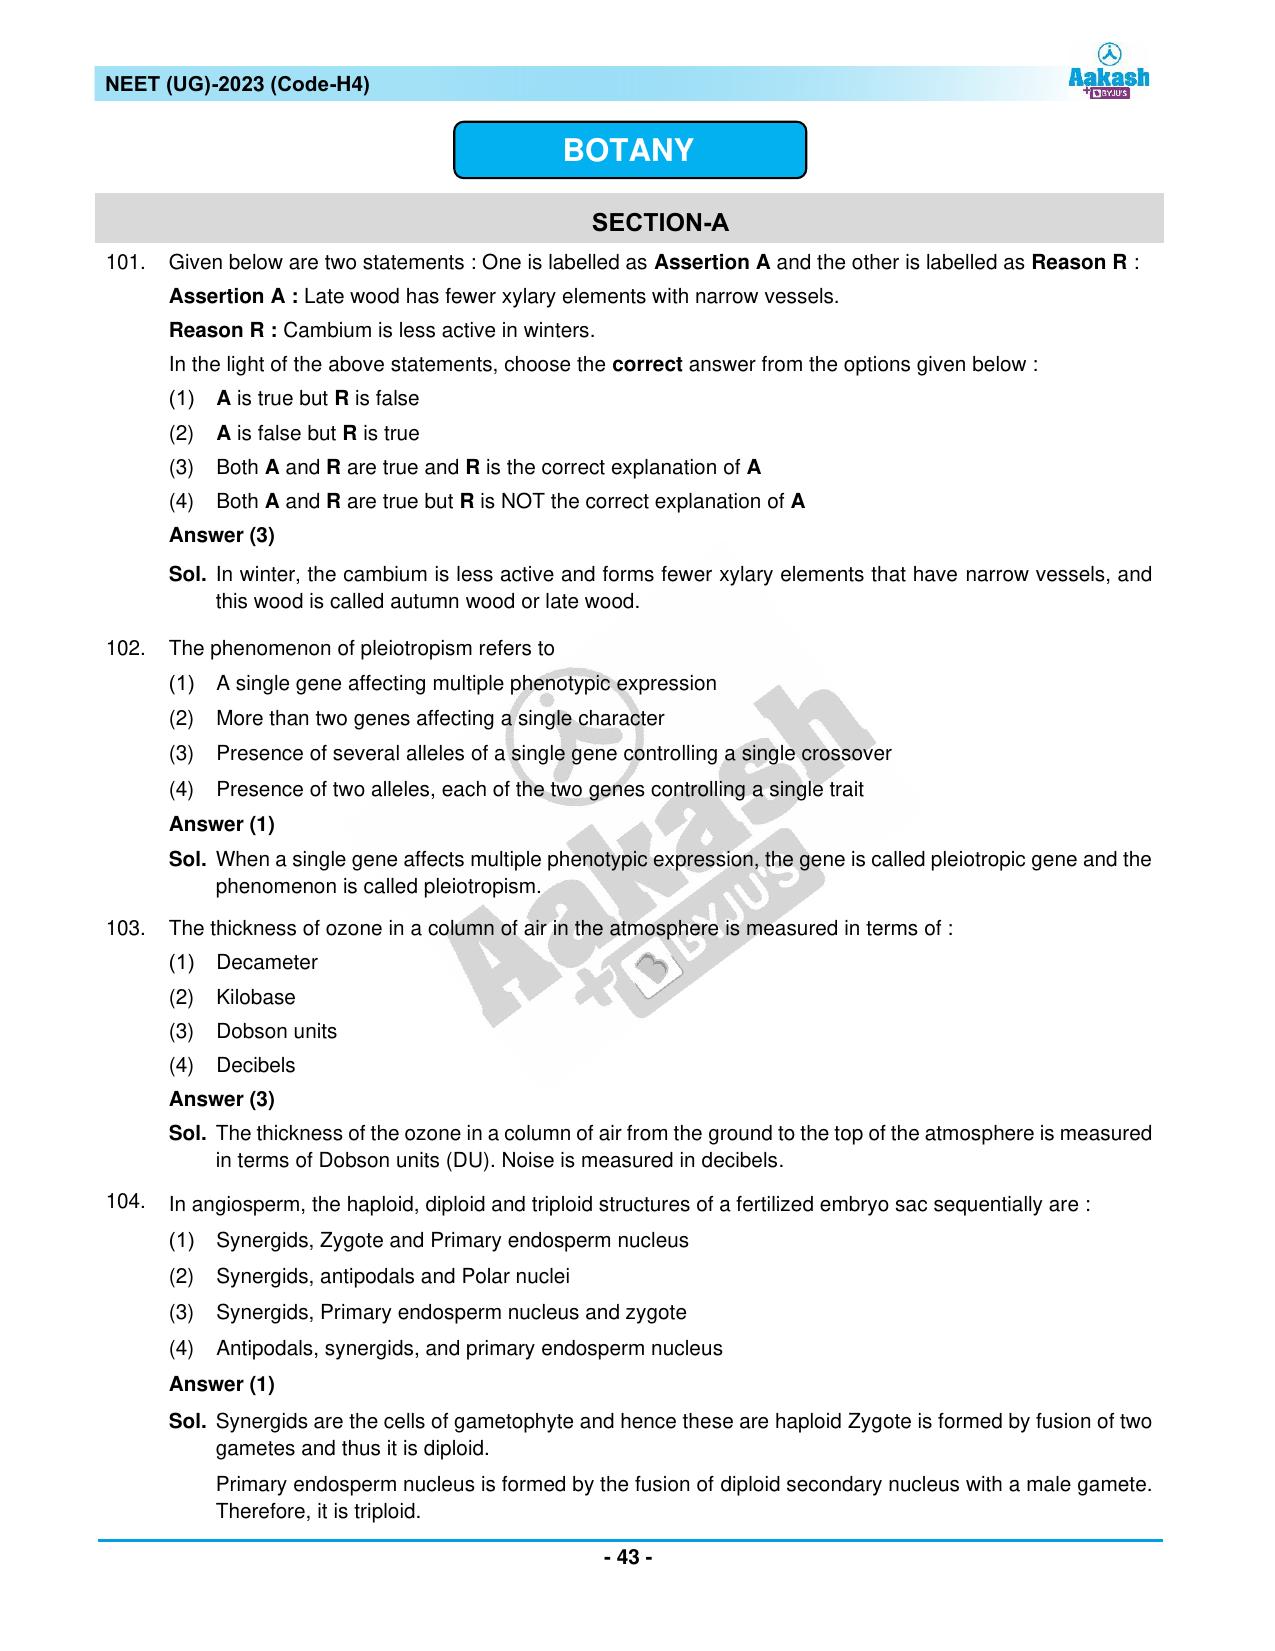 NEET 2023 Question Paper H4 - Page 43